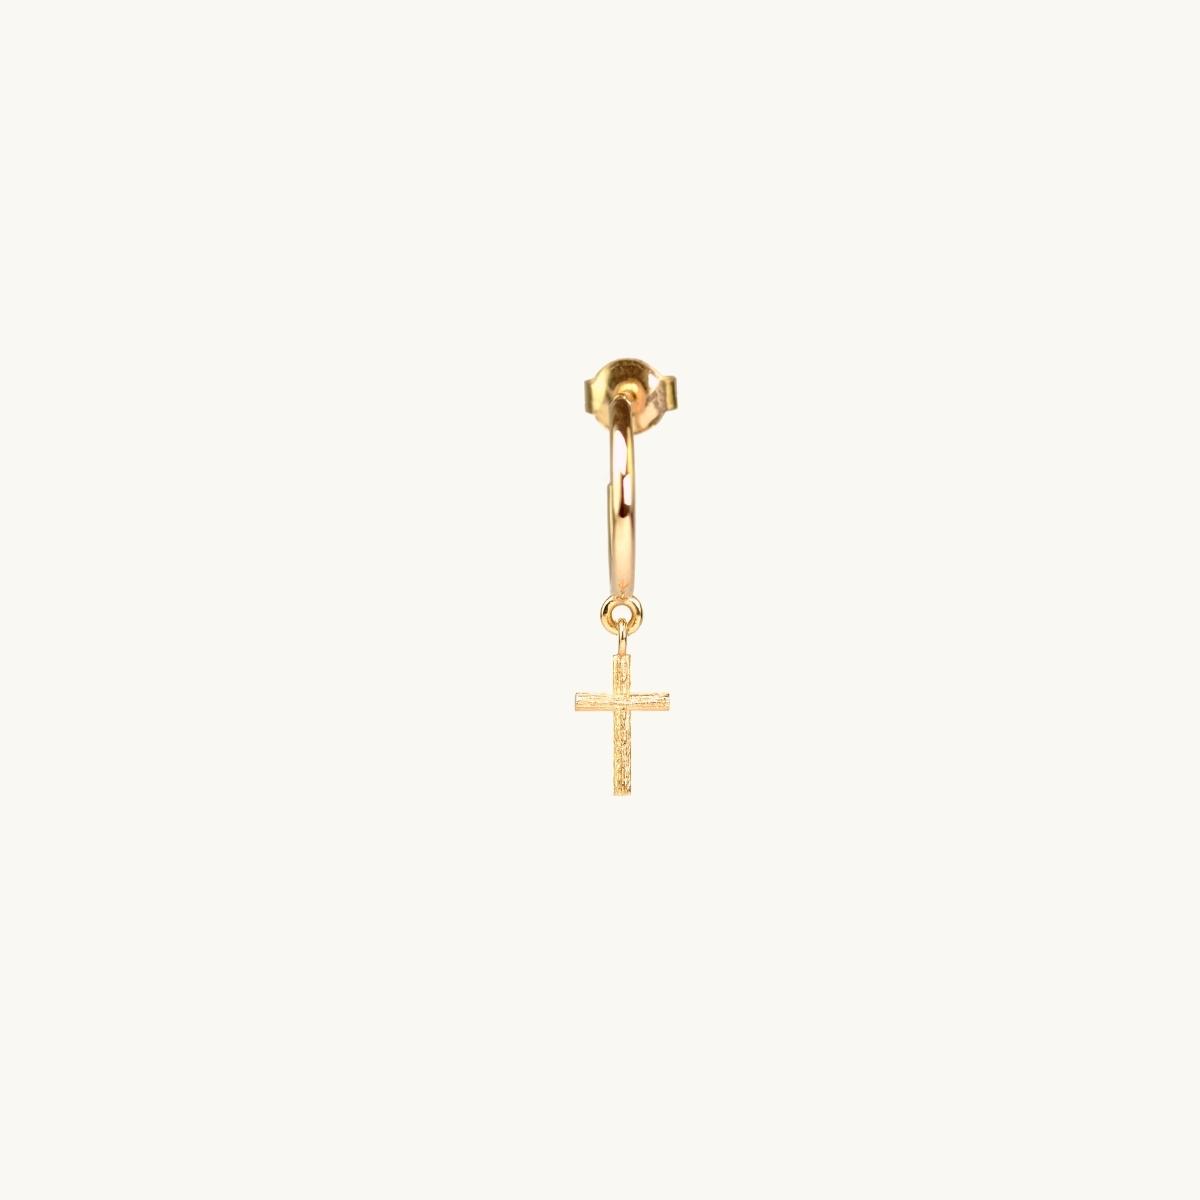 Gold earrings on a hoop with a cross